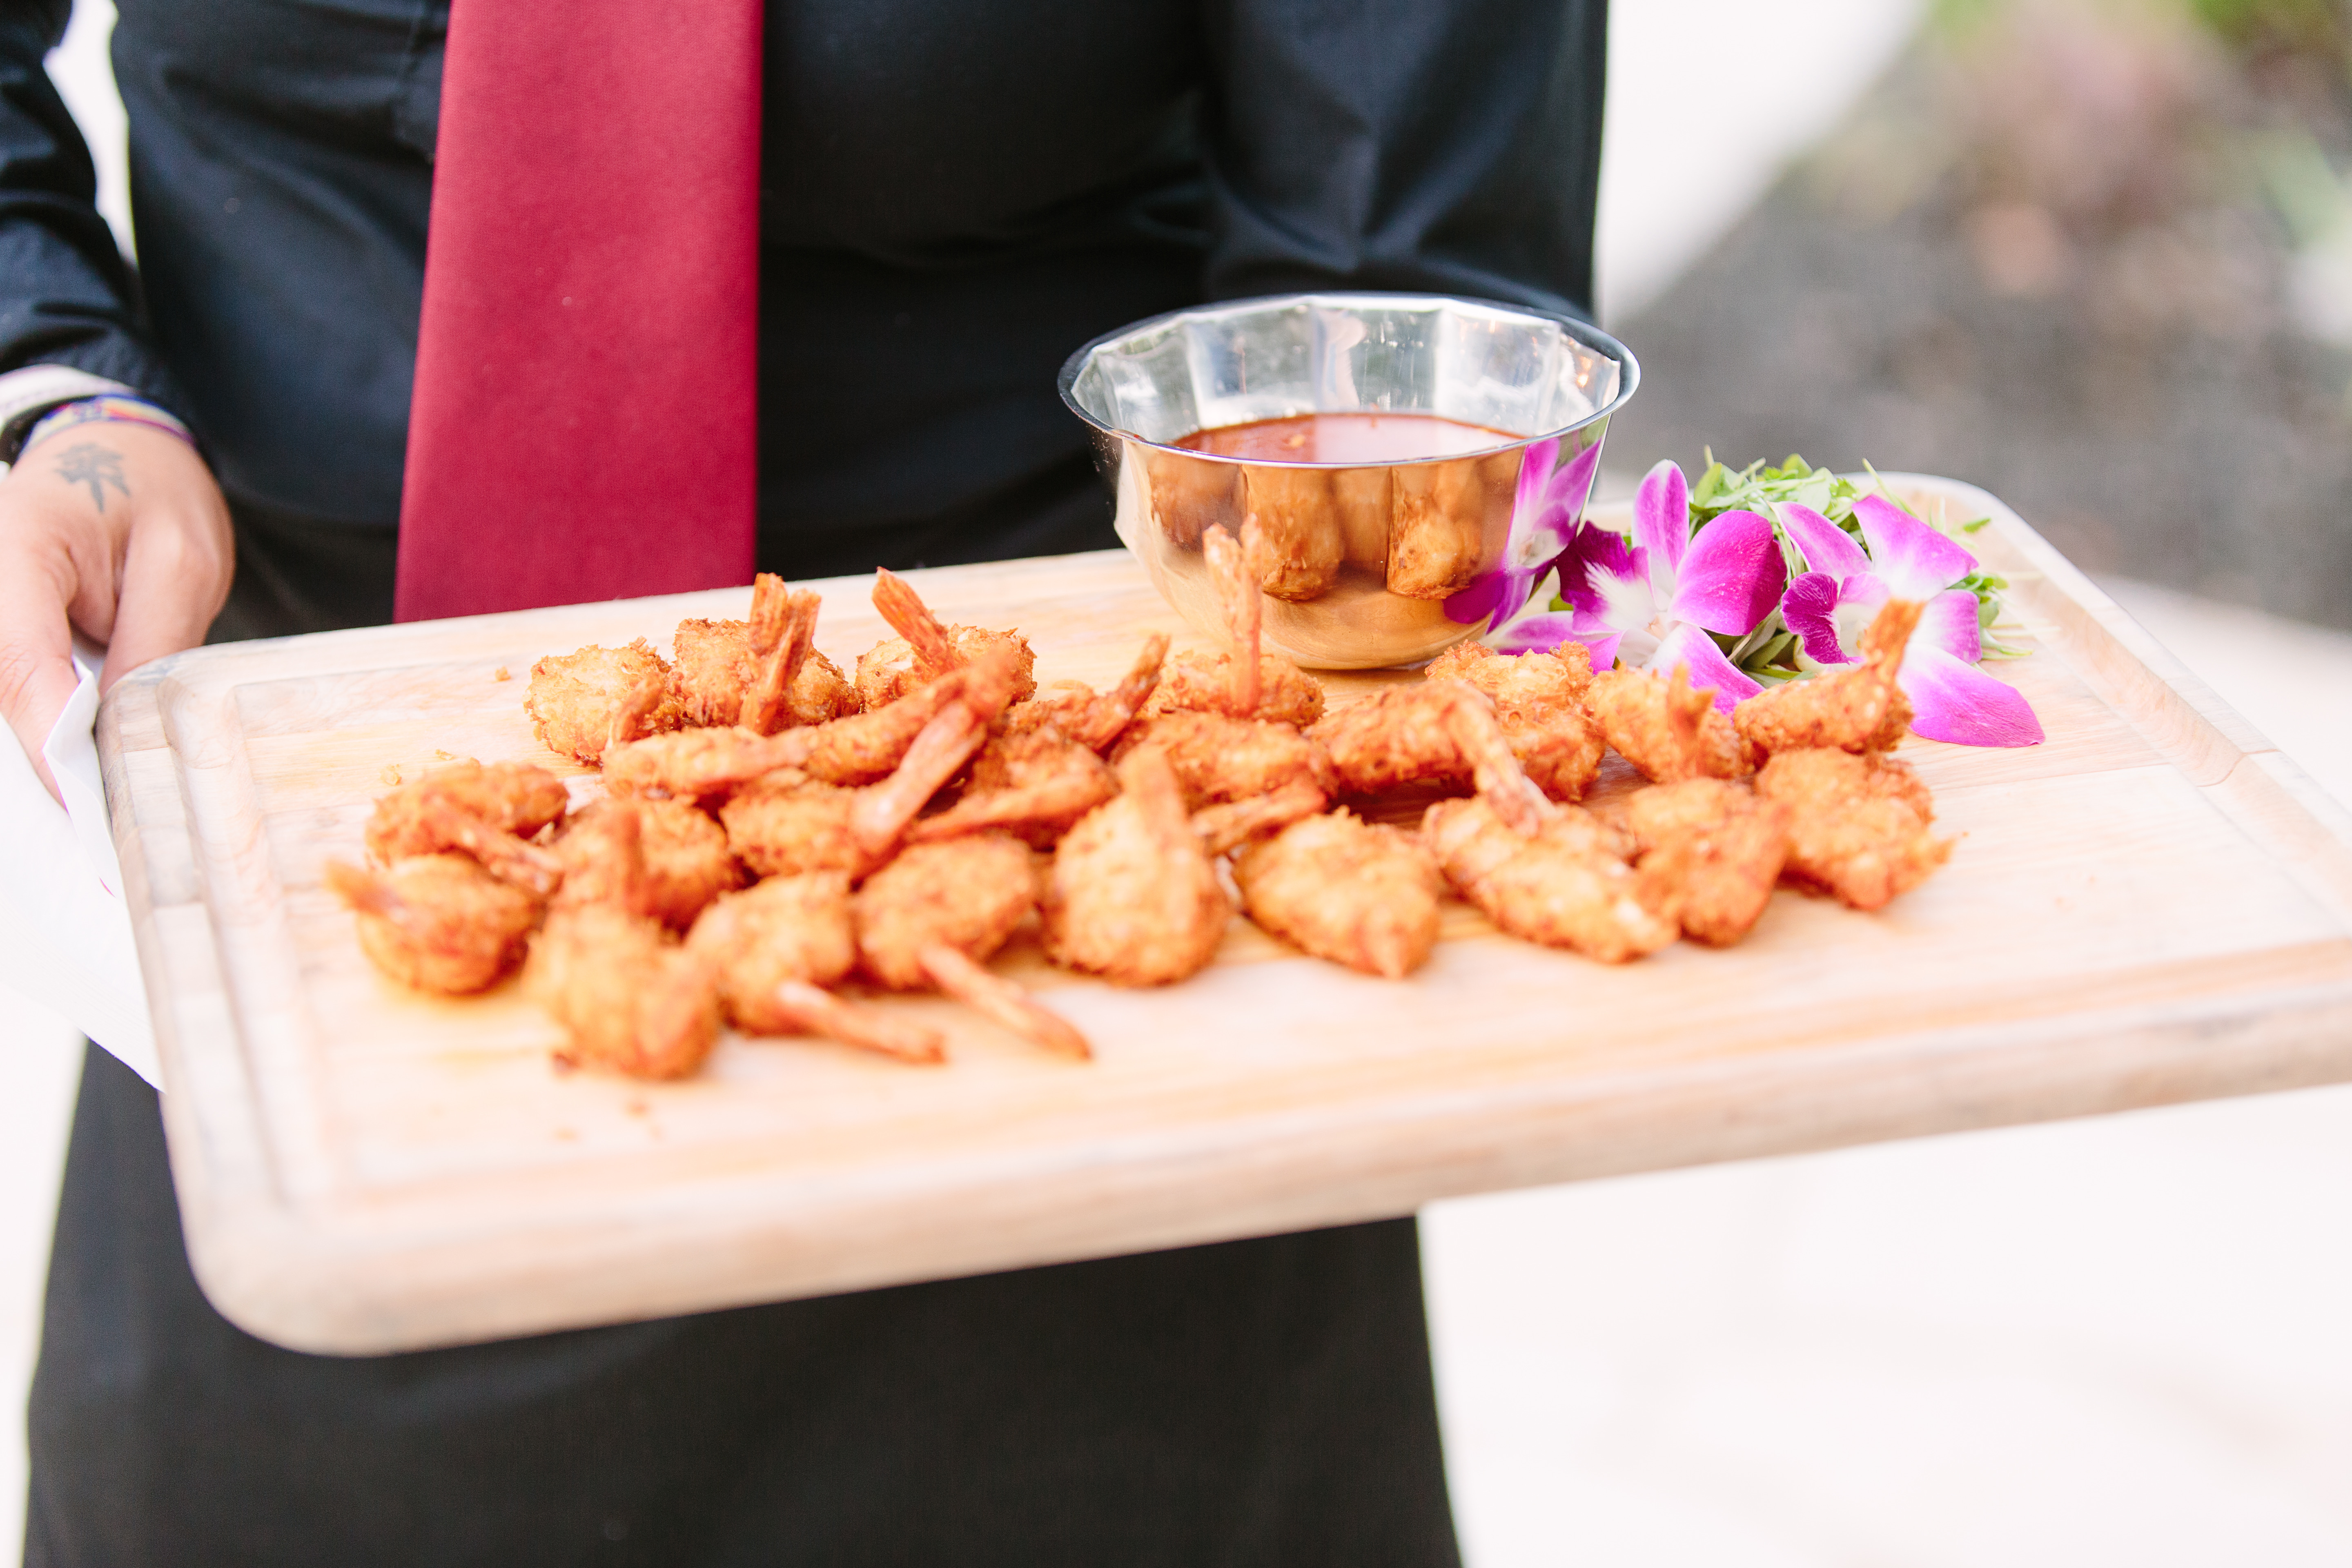 Coconut crusted shrimp and dipping sauce displayed on a wood carving board